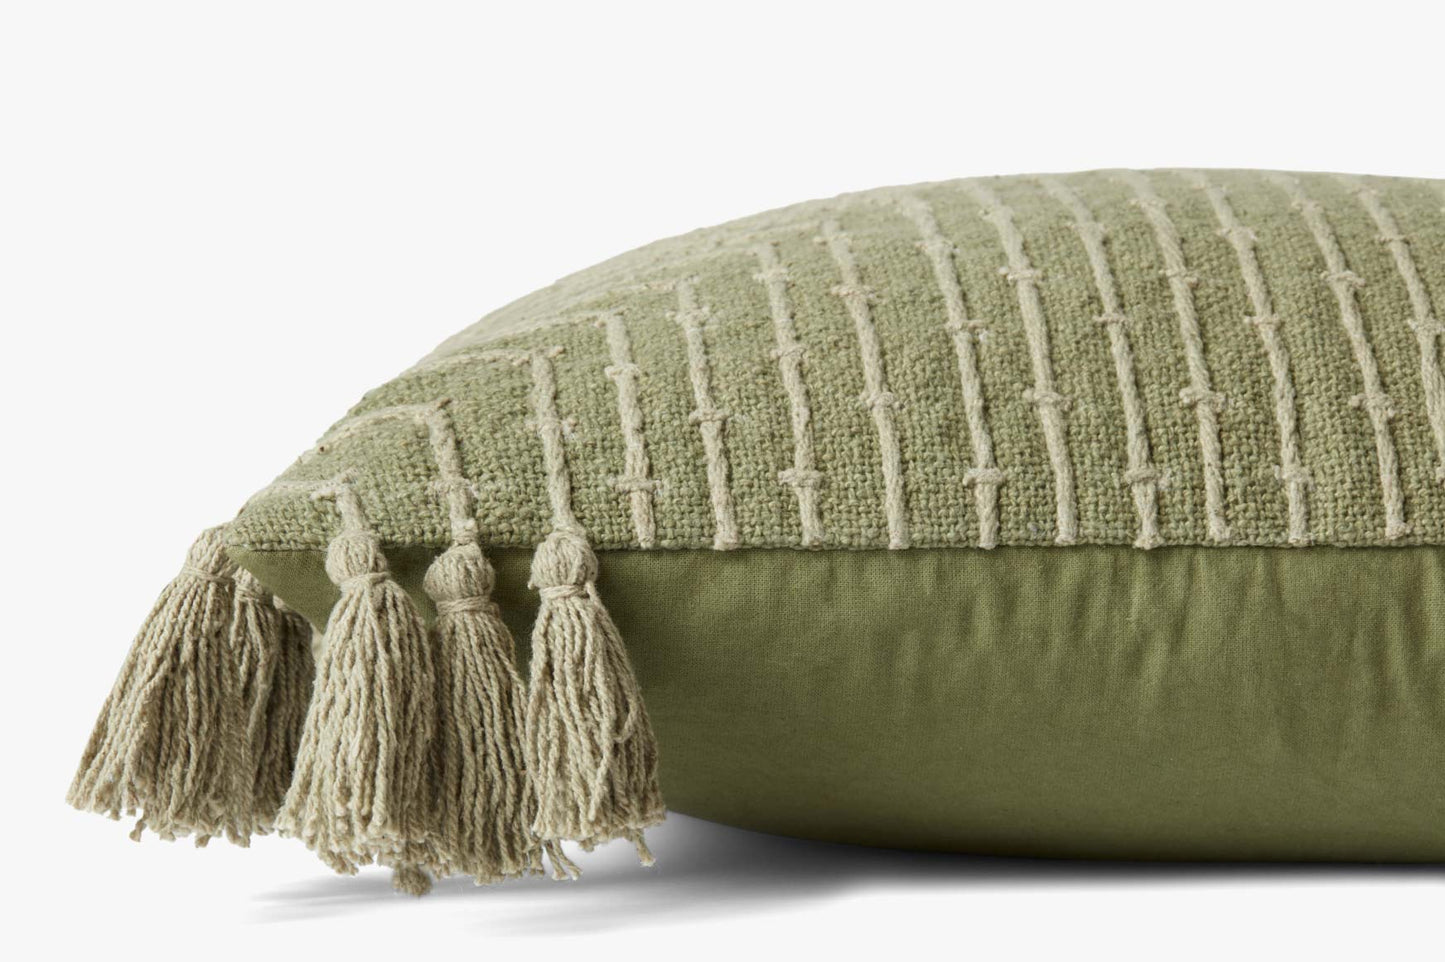 Justina Blakeney x Loloi Embroidered Pillow - Olive (Set of 2)